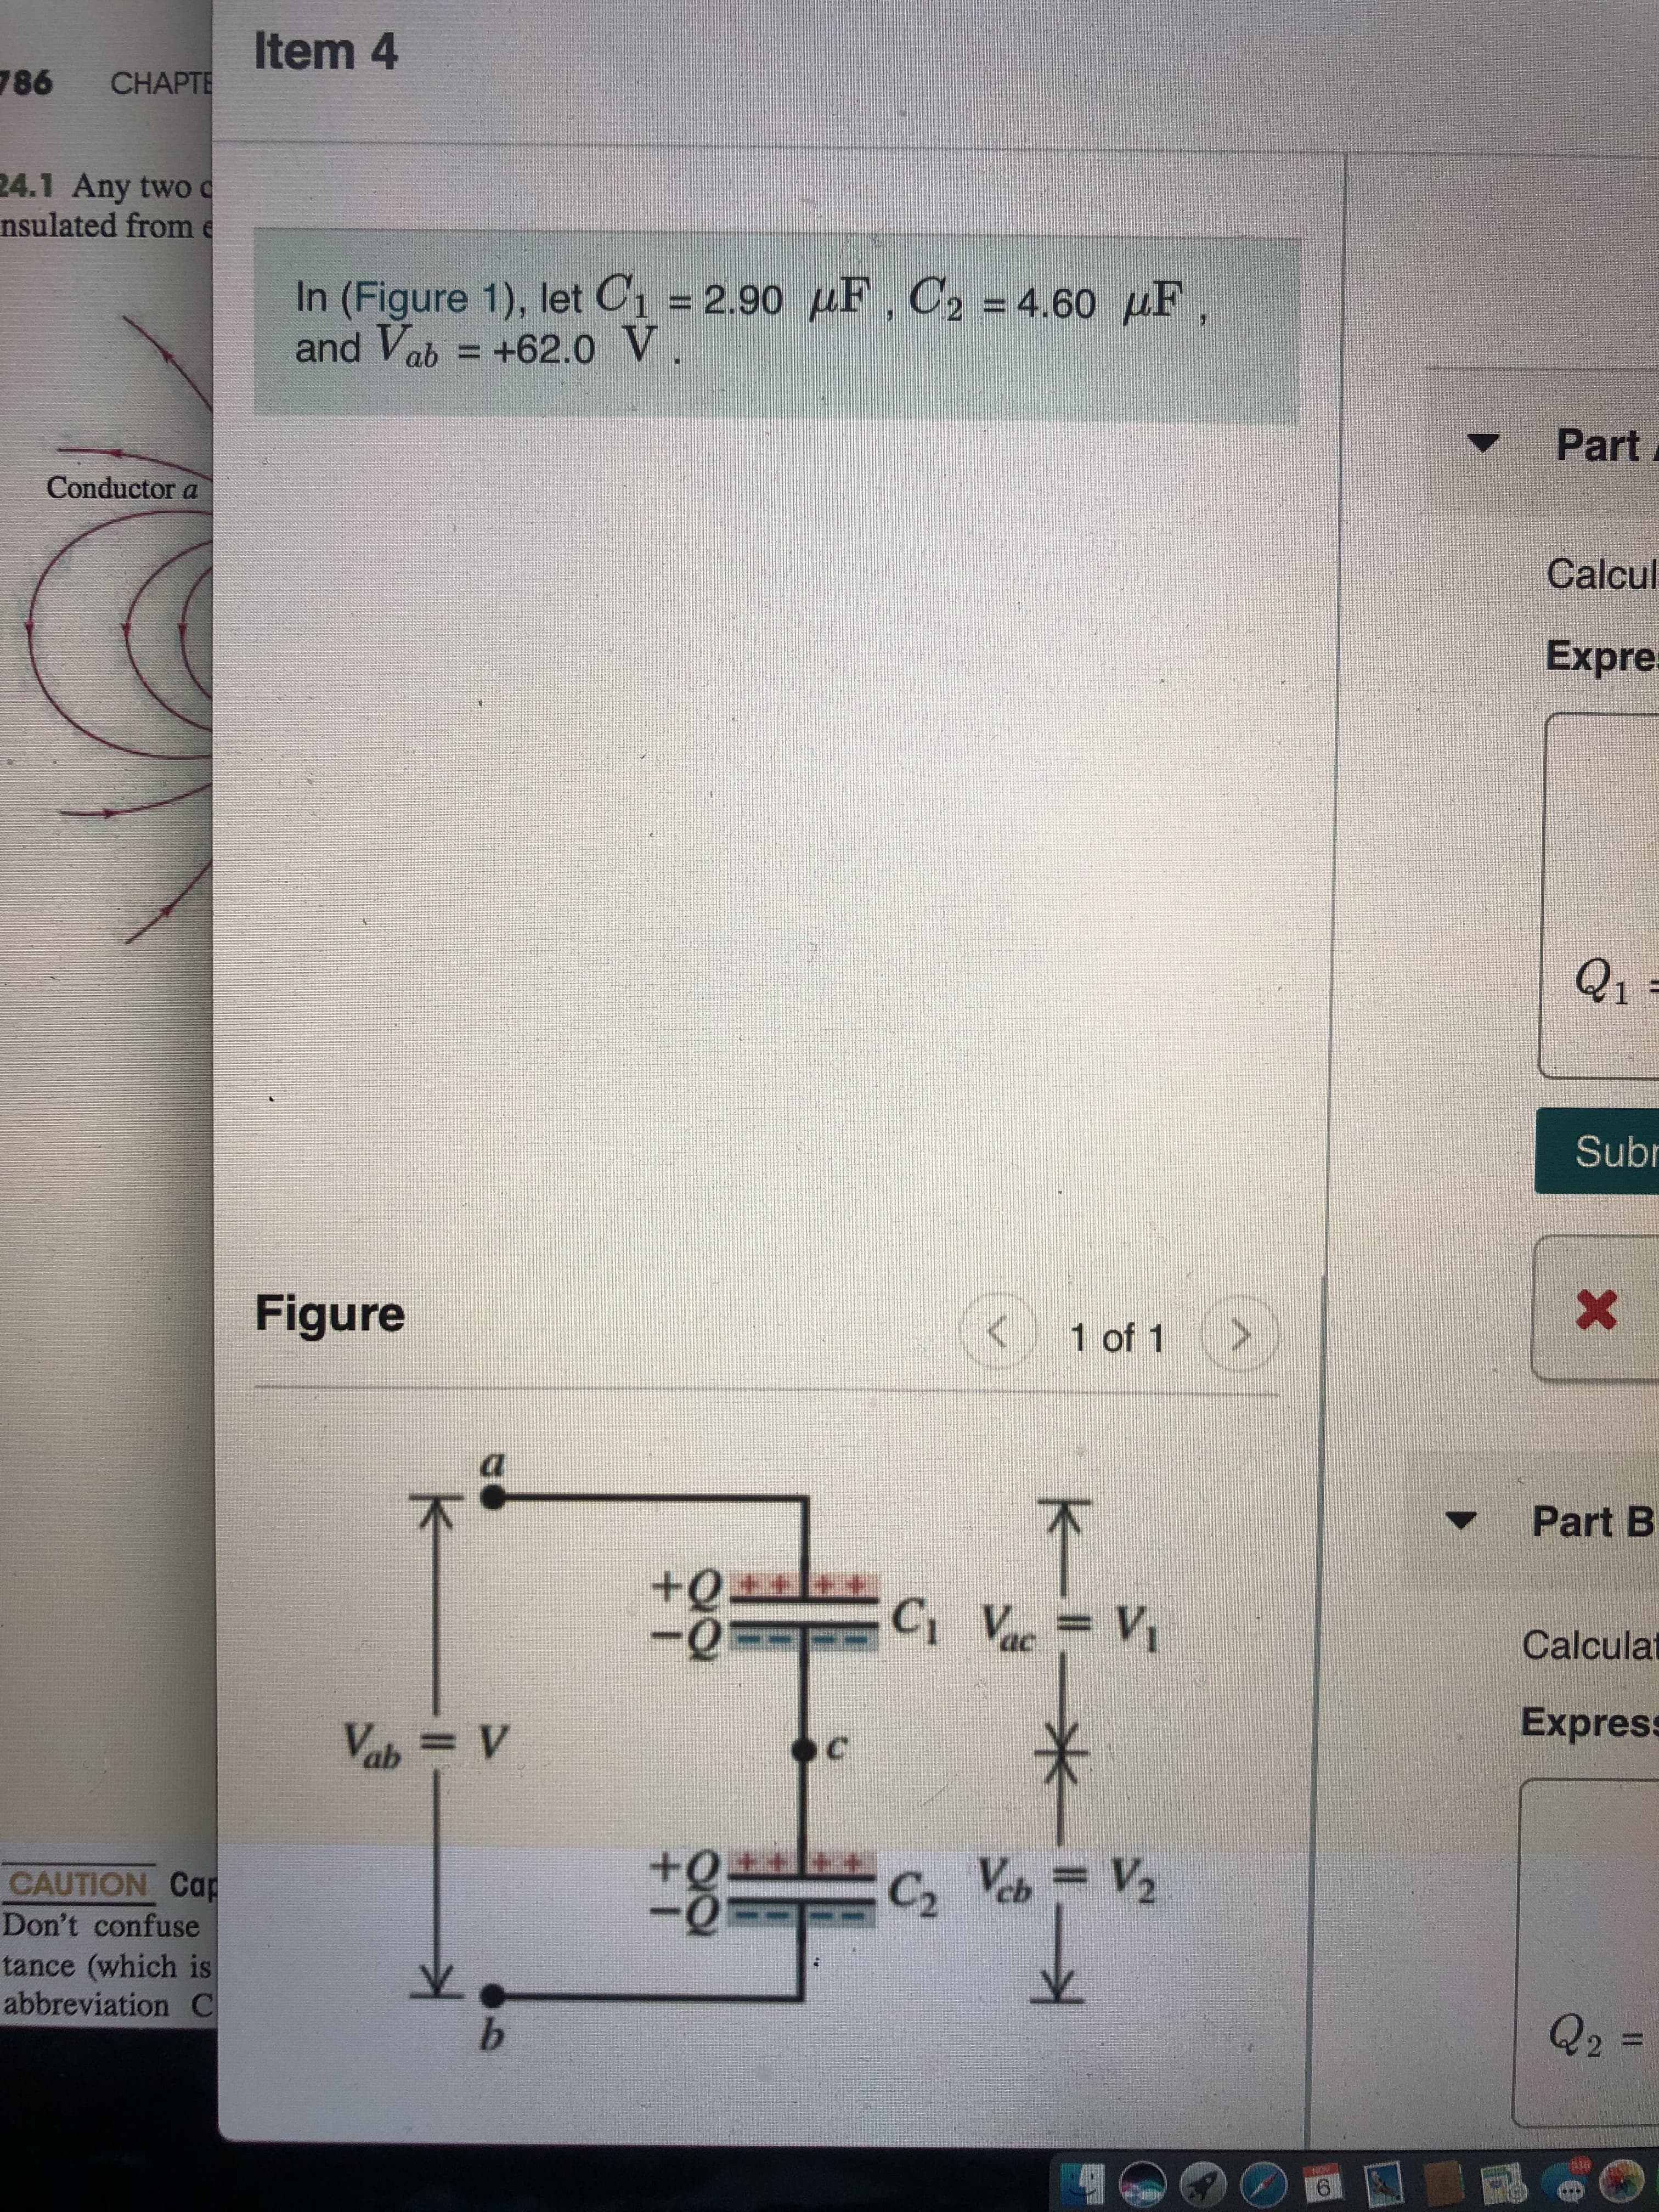 Item 4
CHAPTE
98
24.1 Any two
nsulated frome
In (Figure 1), let C1 2.90 F, C2 4.60 HF,
and Vab = +62.0 V
Part
Conductor a
Calcul
Expre
Q1
Sub
X
Figure
>
1 of 1
Part B
+Q
-0
Ci Vac= Vi
Calculat
Express
X
Vab= V
Veb= V2
CAUTION Cap
Don't confuse
tance (which is
abbreviation C
Q2
b
6
